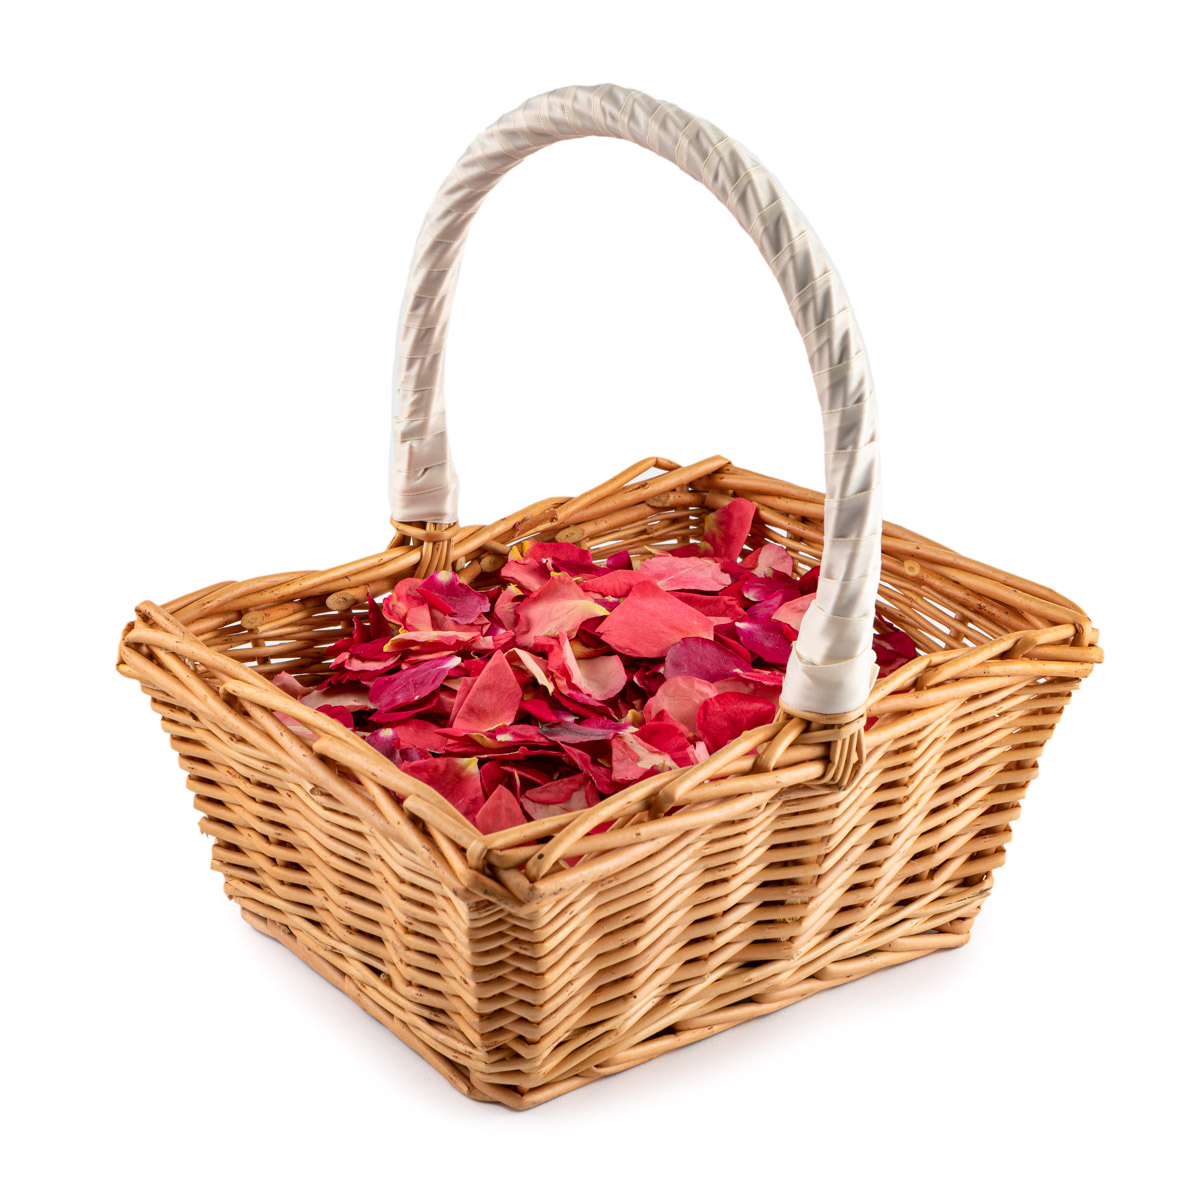 A Rectangular Basket filled with Rose Petal Confetti